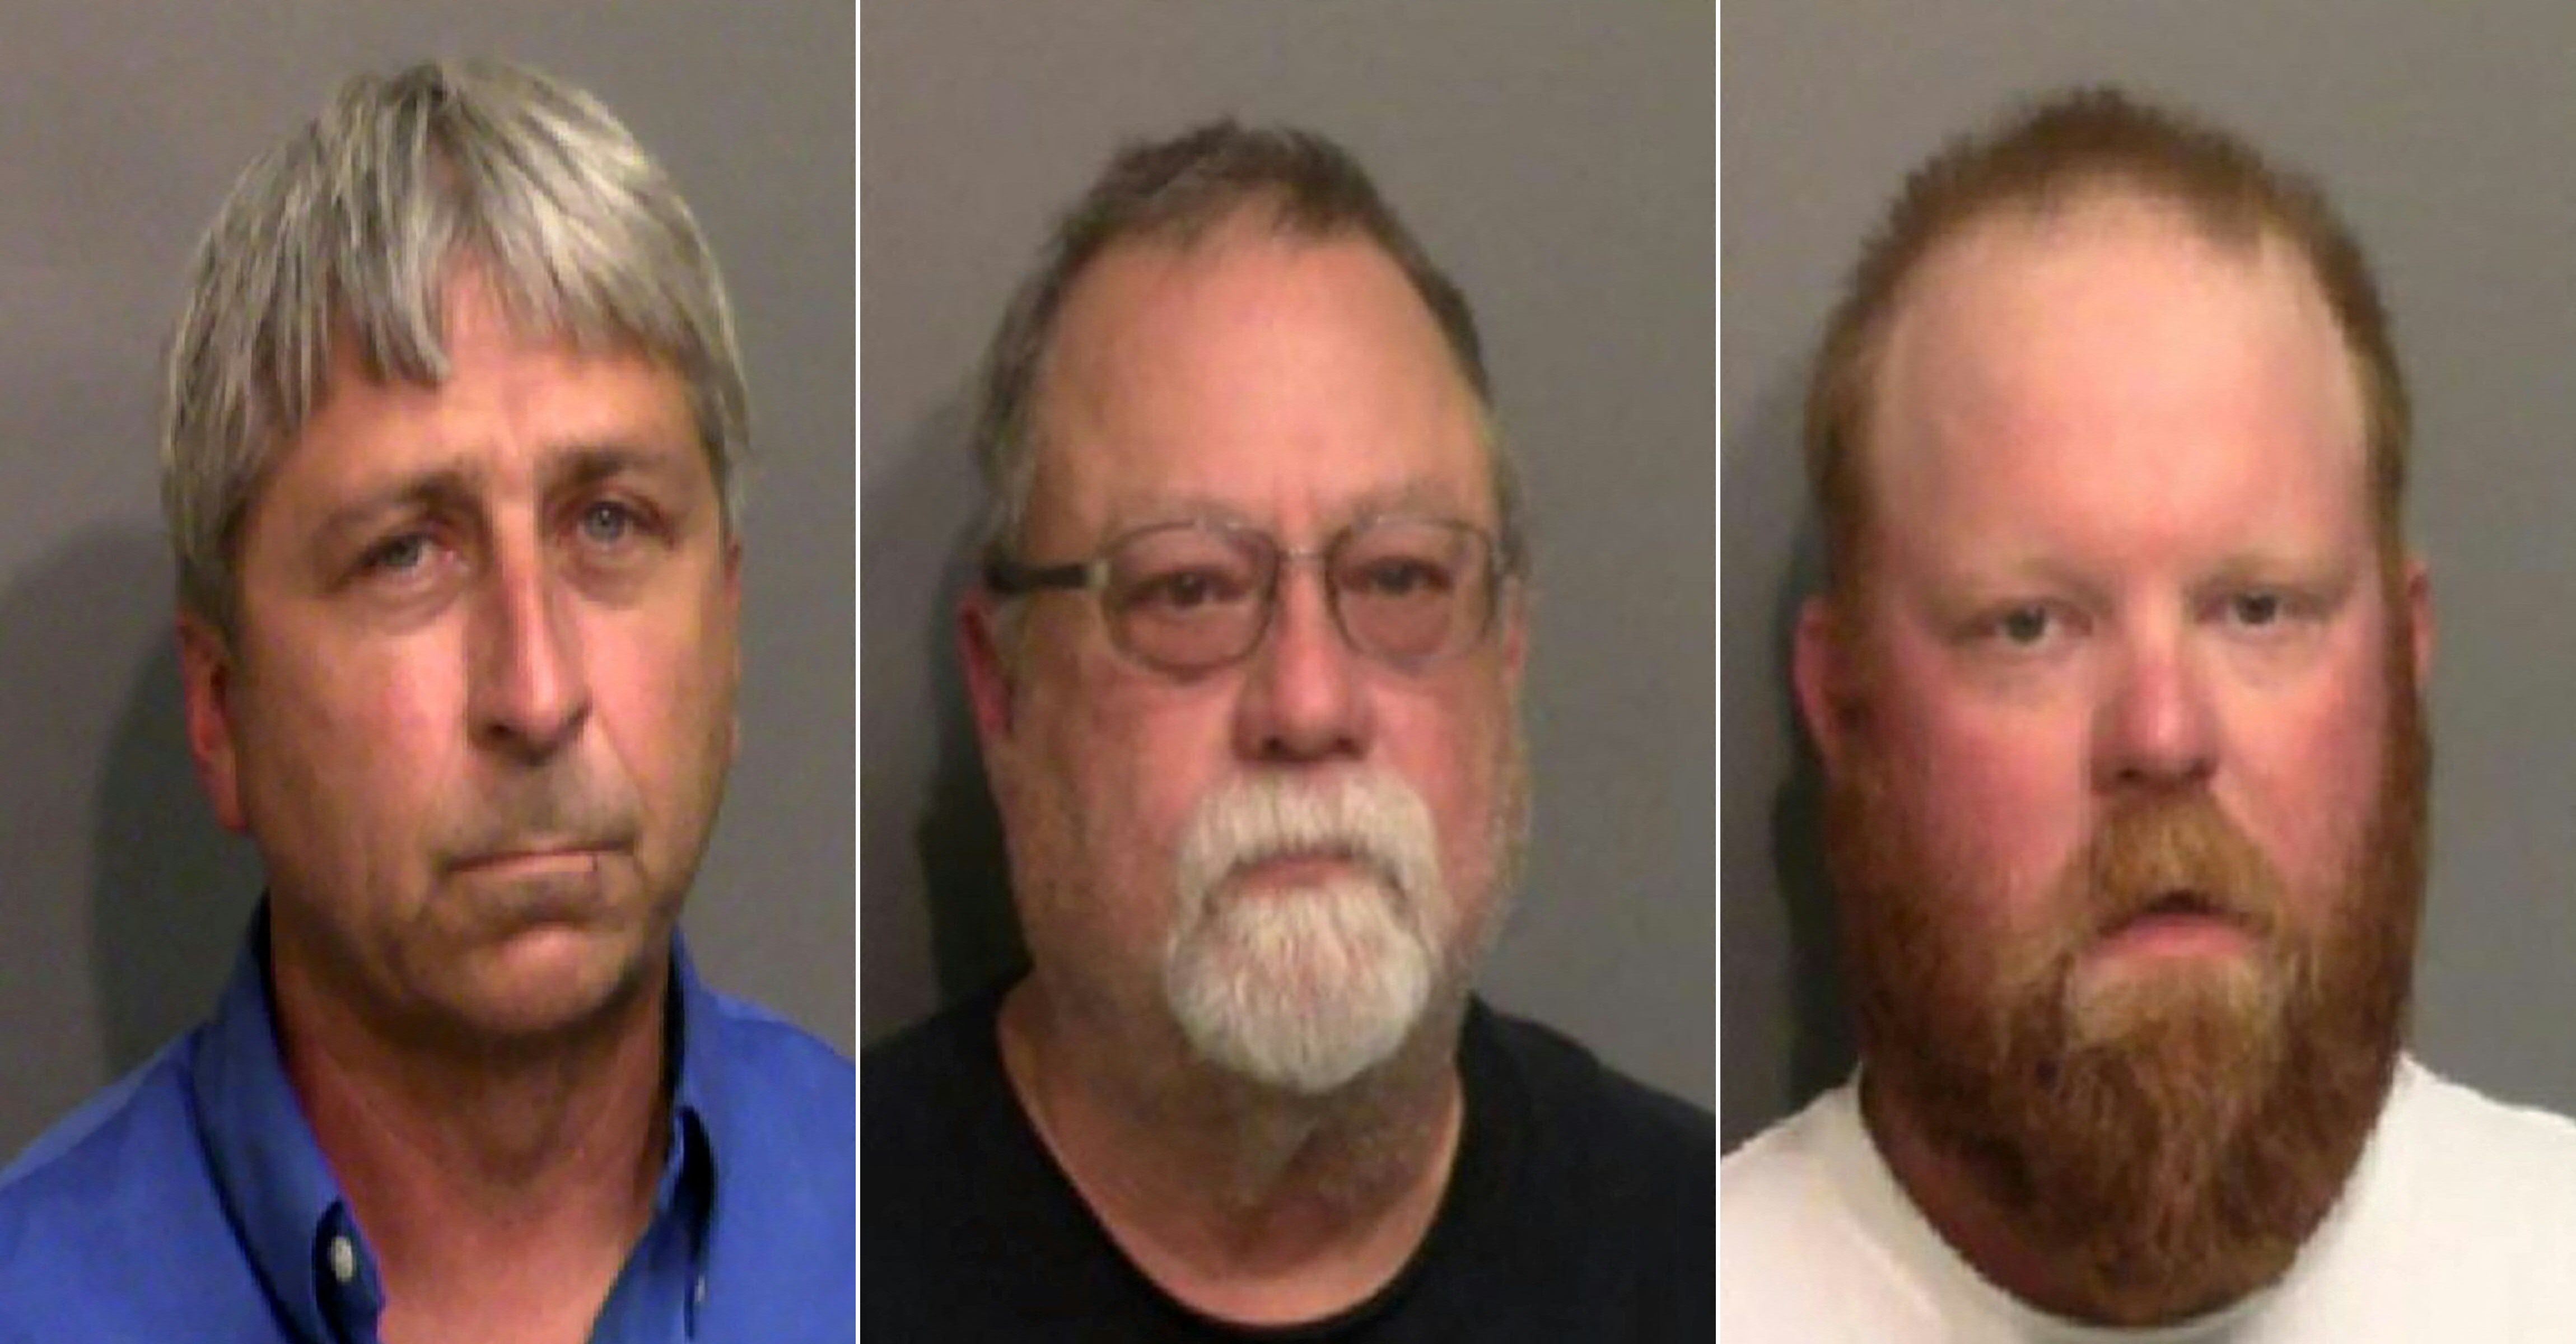 Mugshots of William “Roddie” Bryan Jr, Gregory McMichael and Travis McMichael (from left to right)